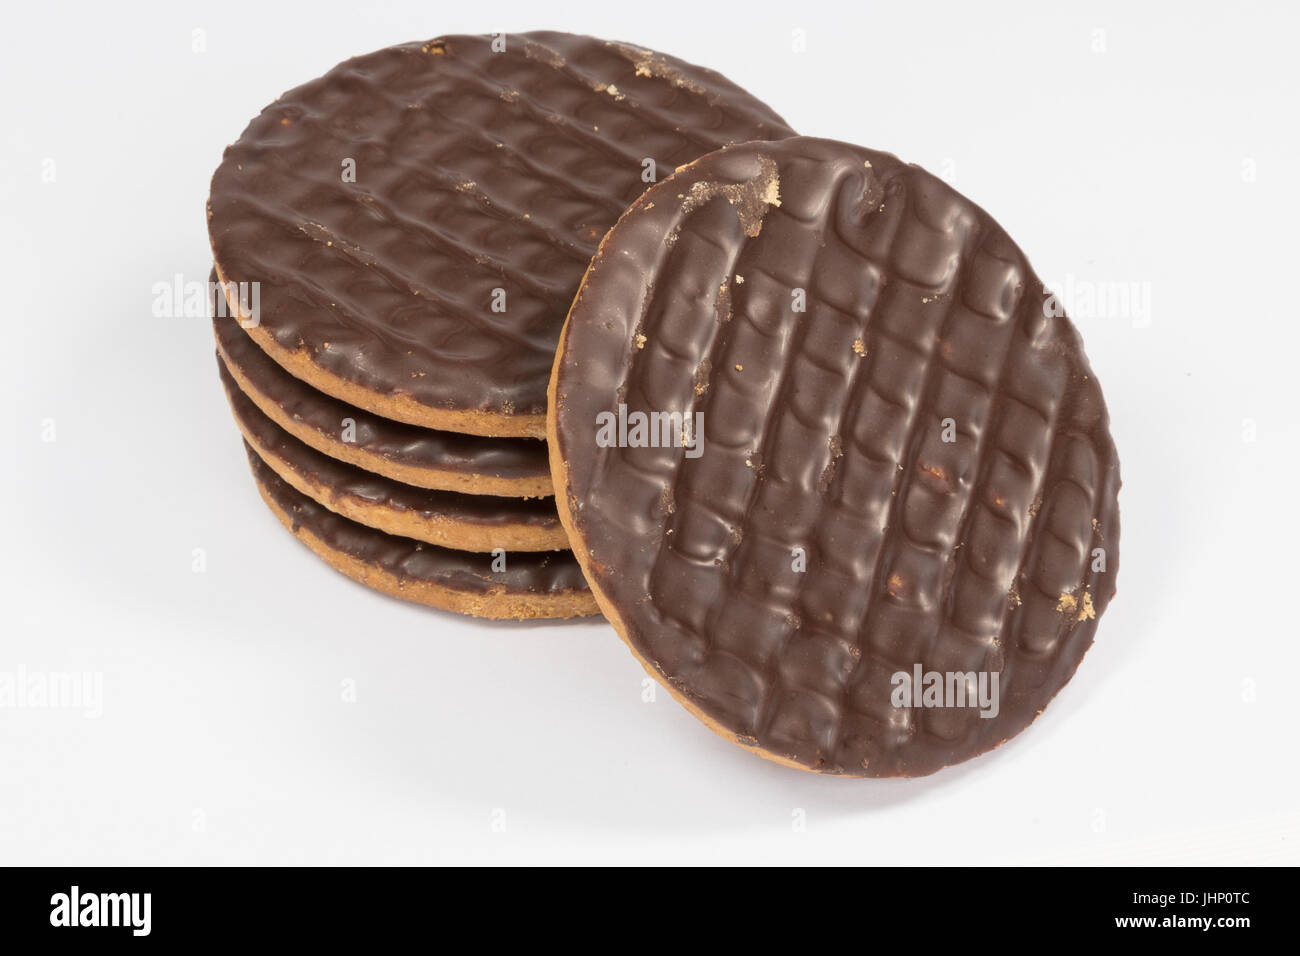 Plain Chocolate digestive biscuits isolated on a white background Stock Photo